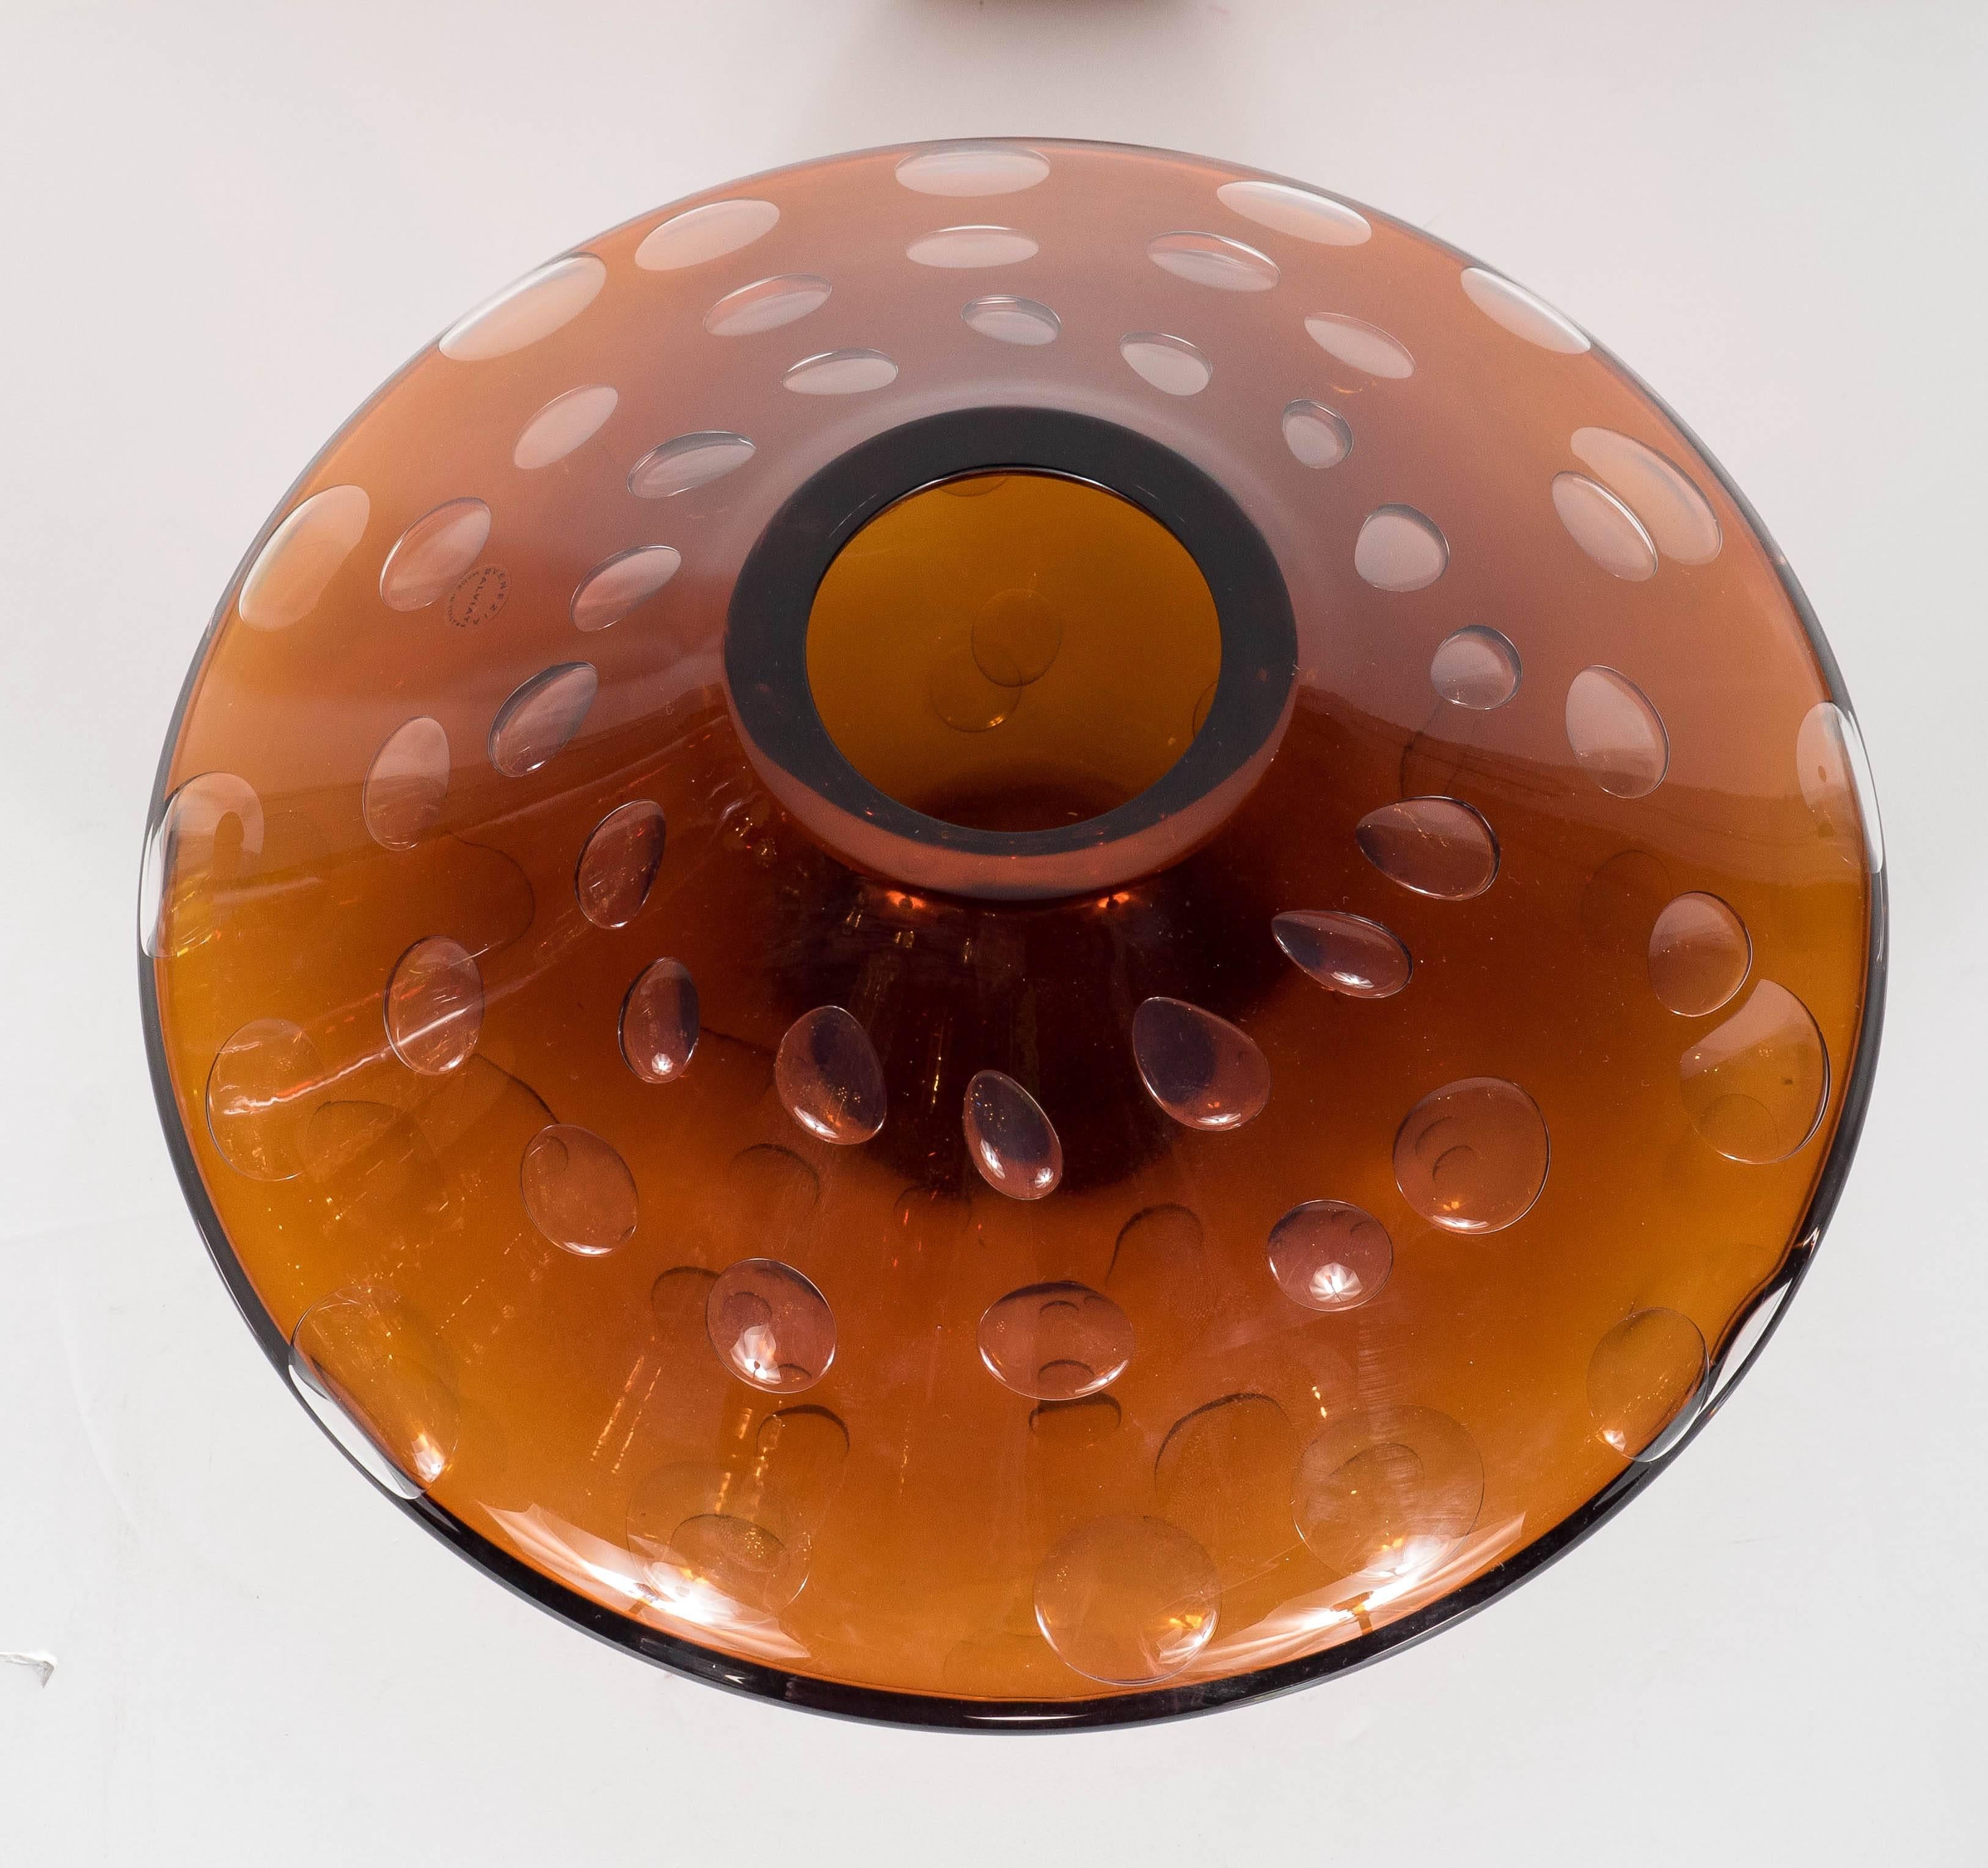 This sculptural Mid-Century Modernist Murano glass disc form vase by Salviati features large graphic bubbles trapped within the glass creating a visual pattern, the glass is a rich tobacco color and when light catches the glass it turns to a rich